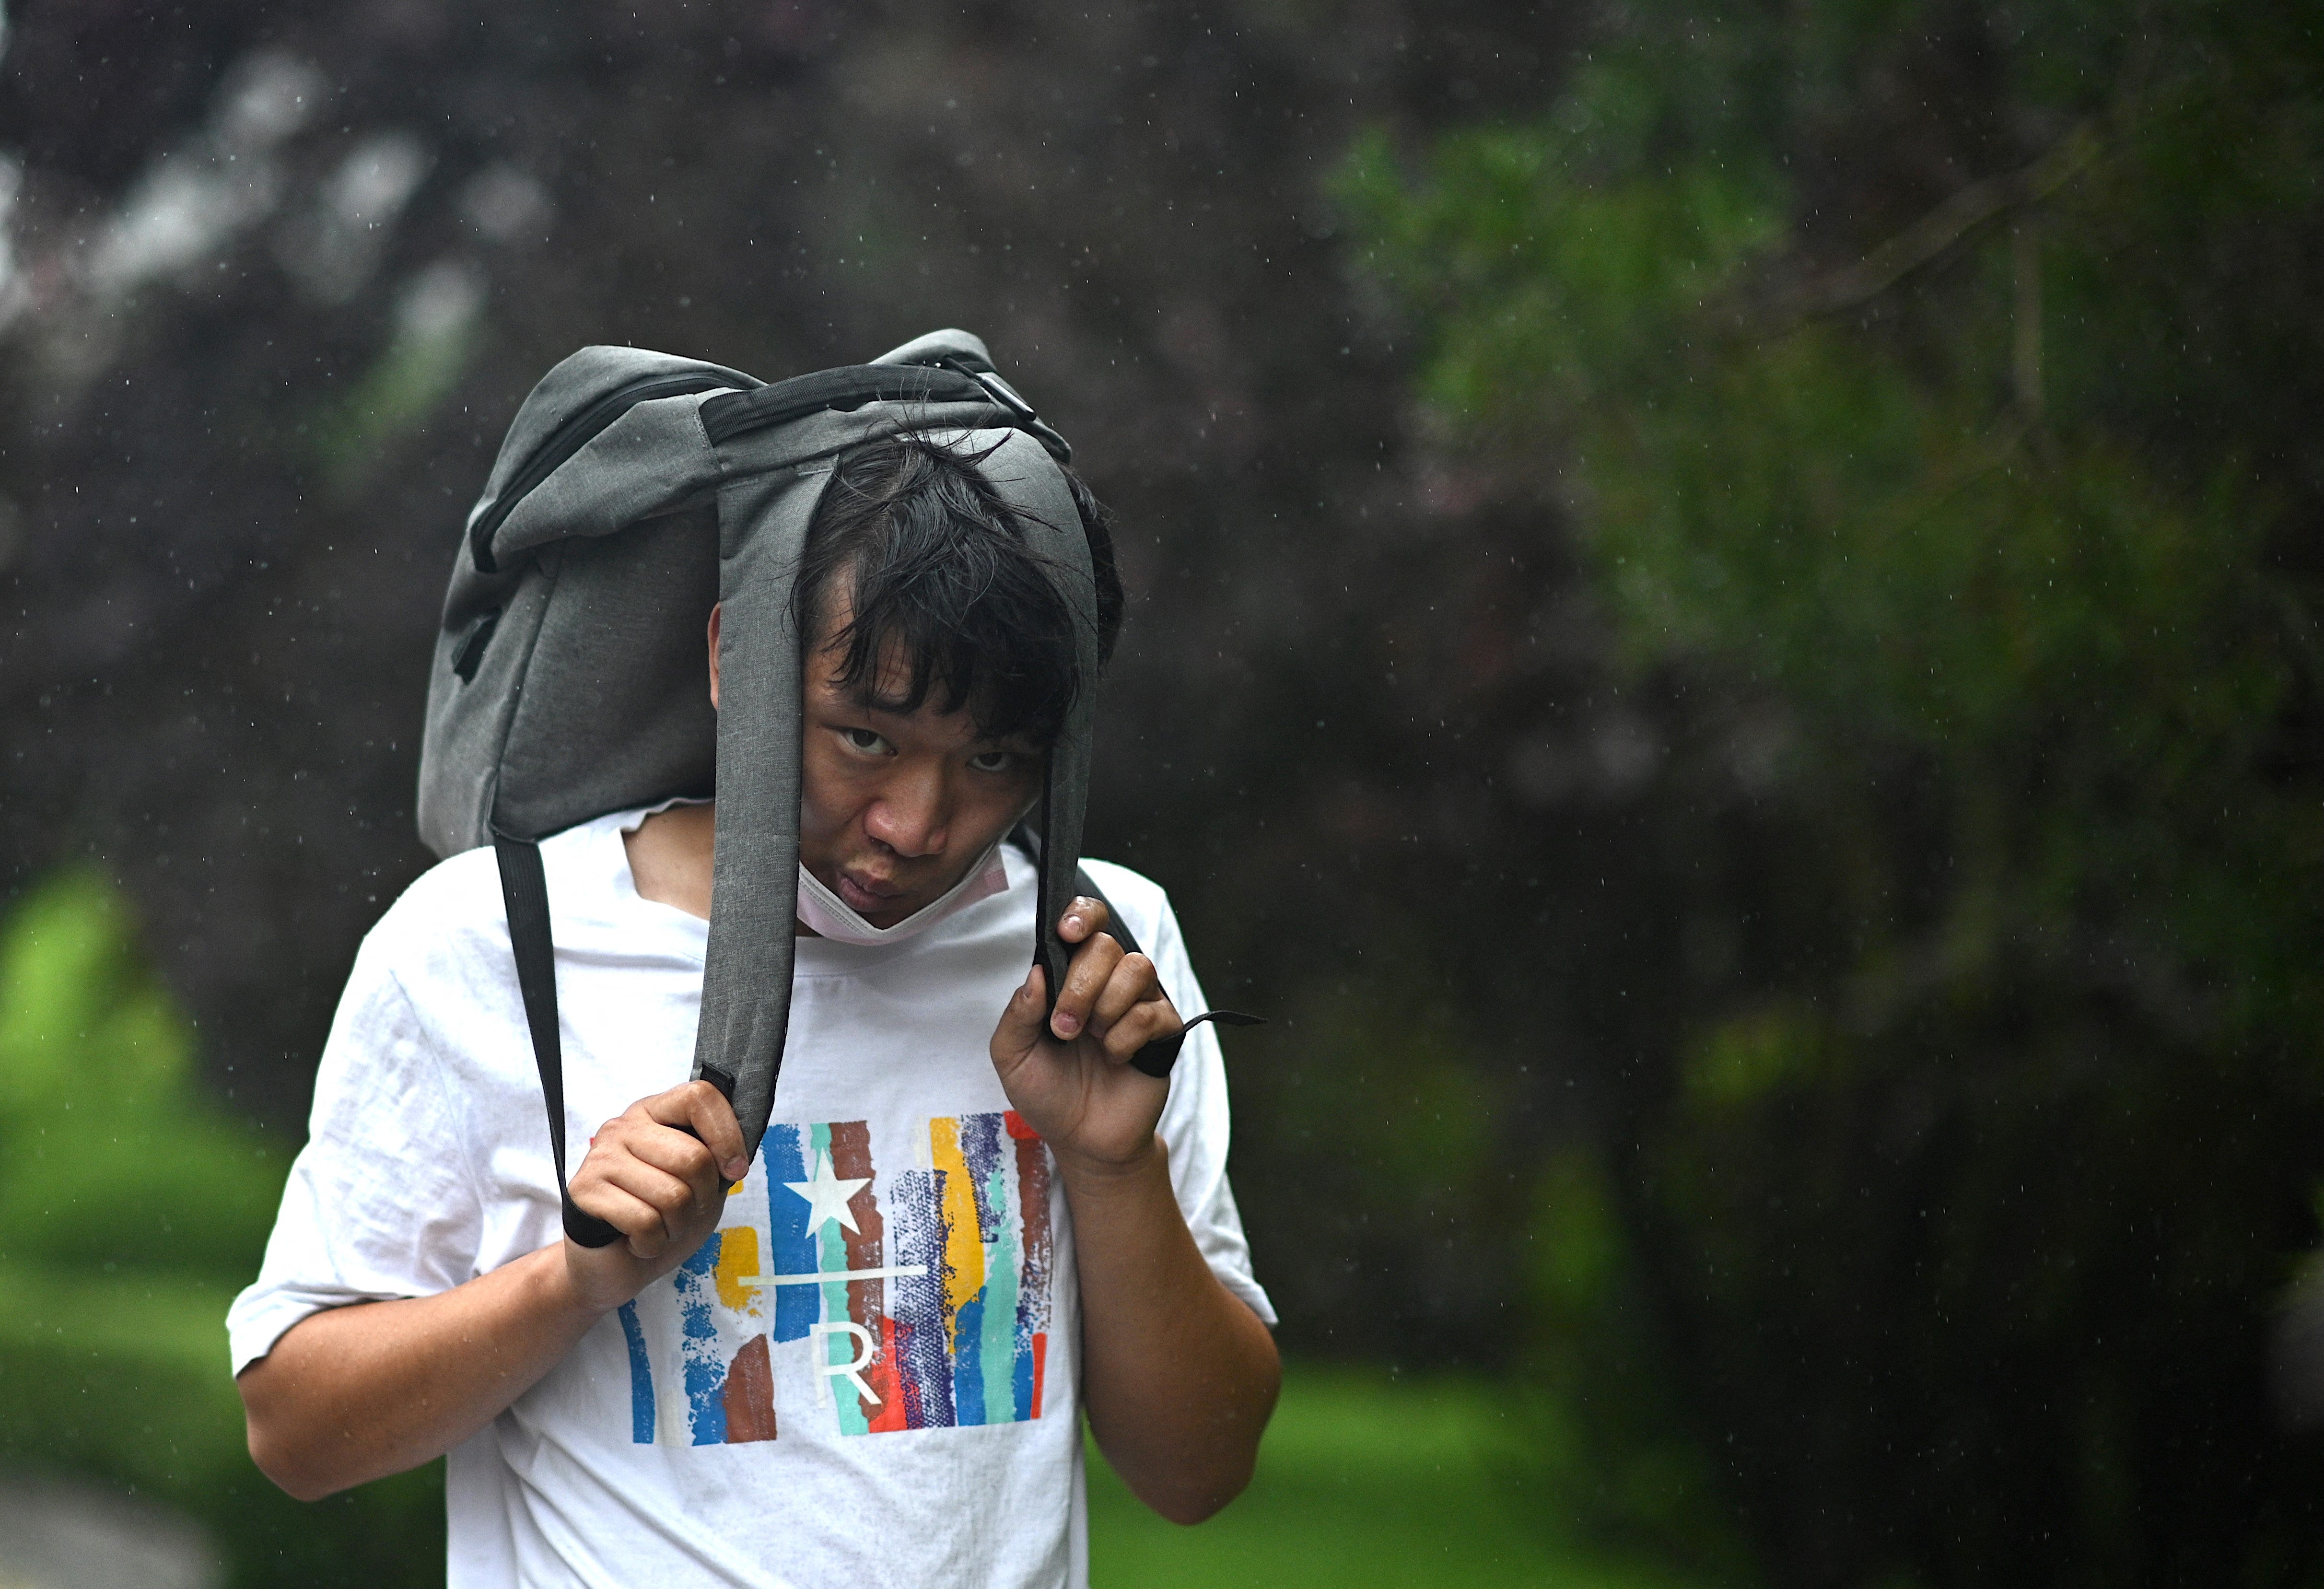 A man uses his bag as cover during a storm in Beijing